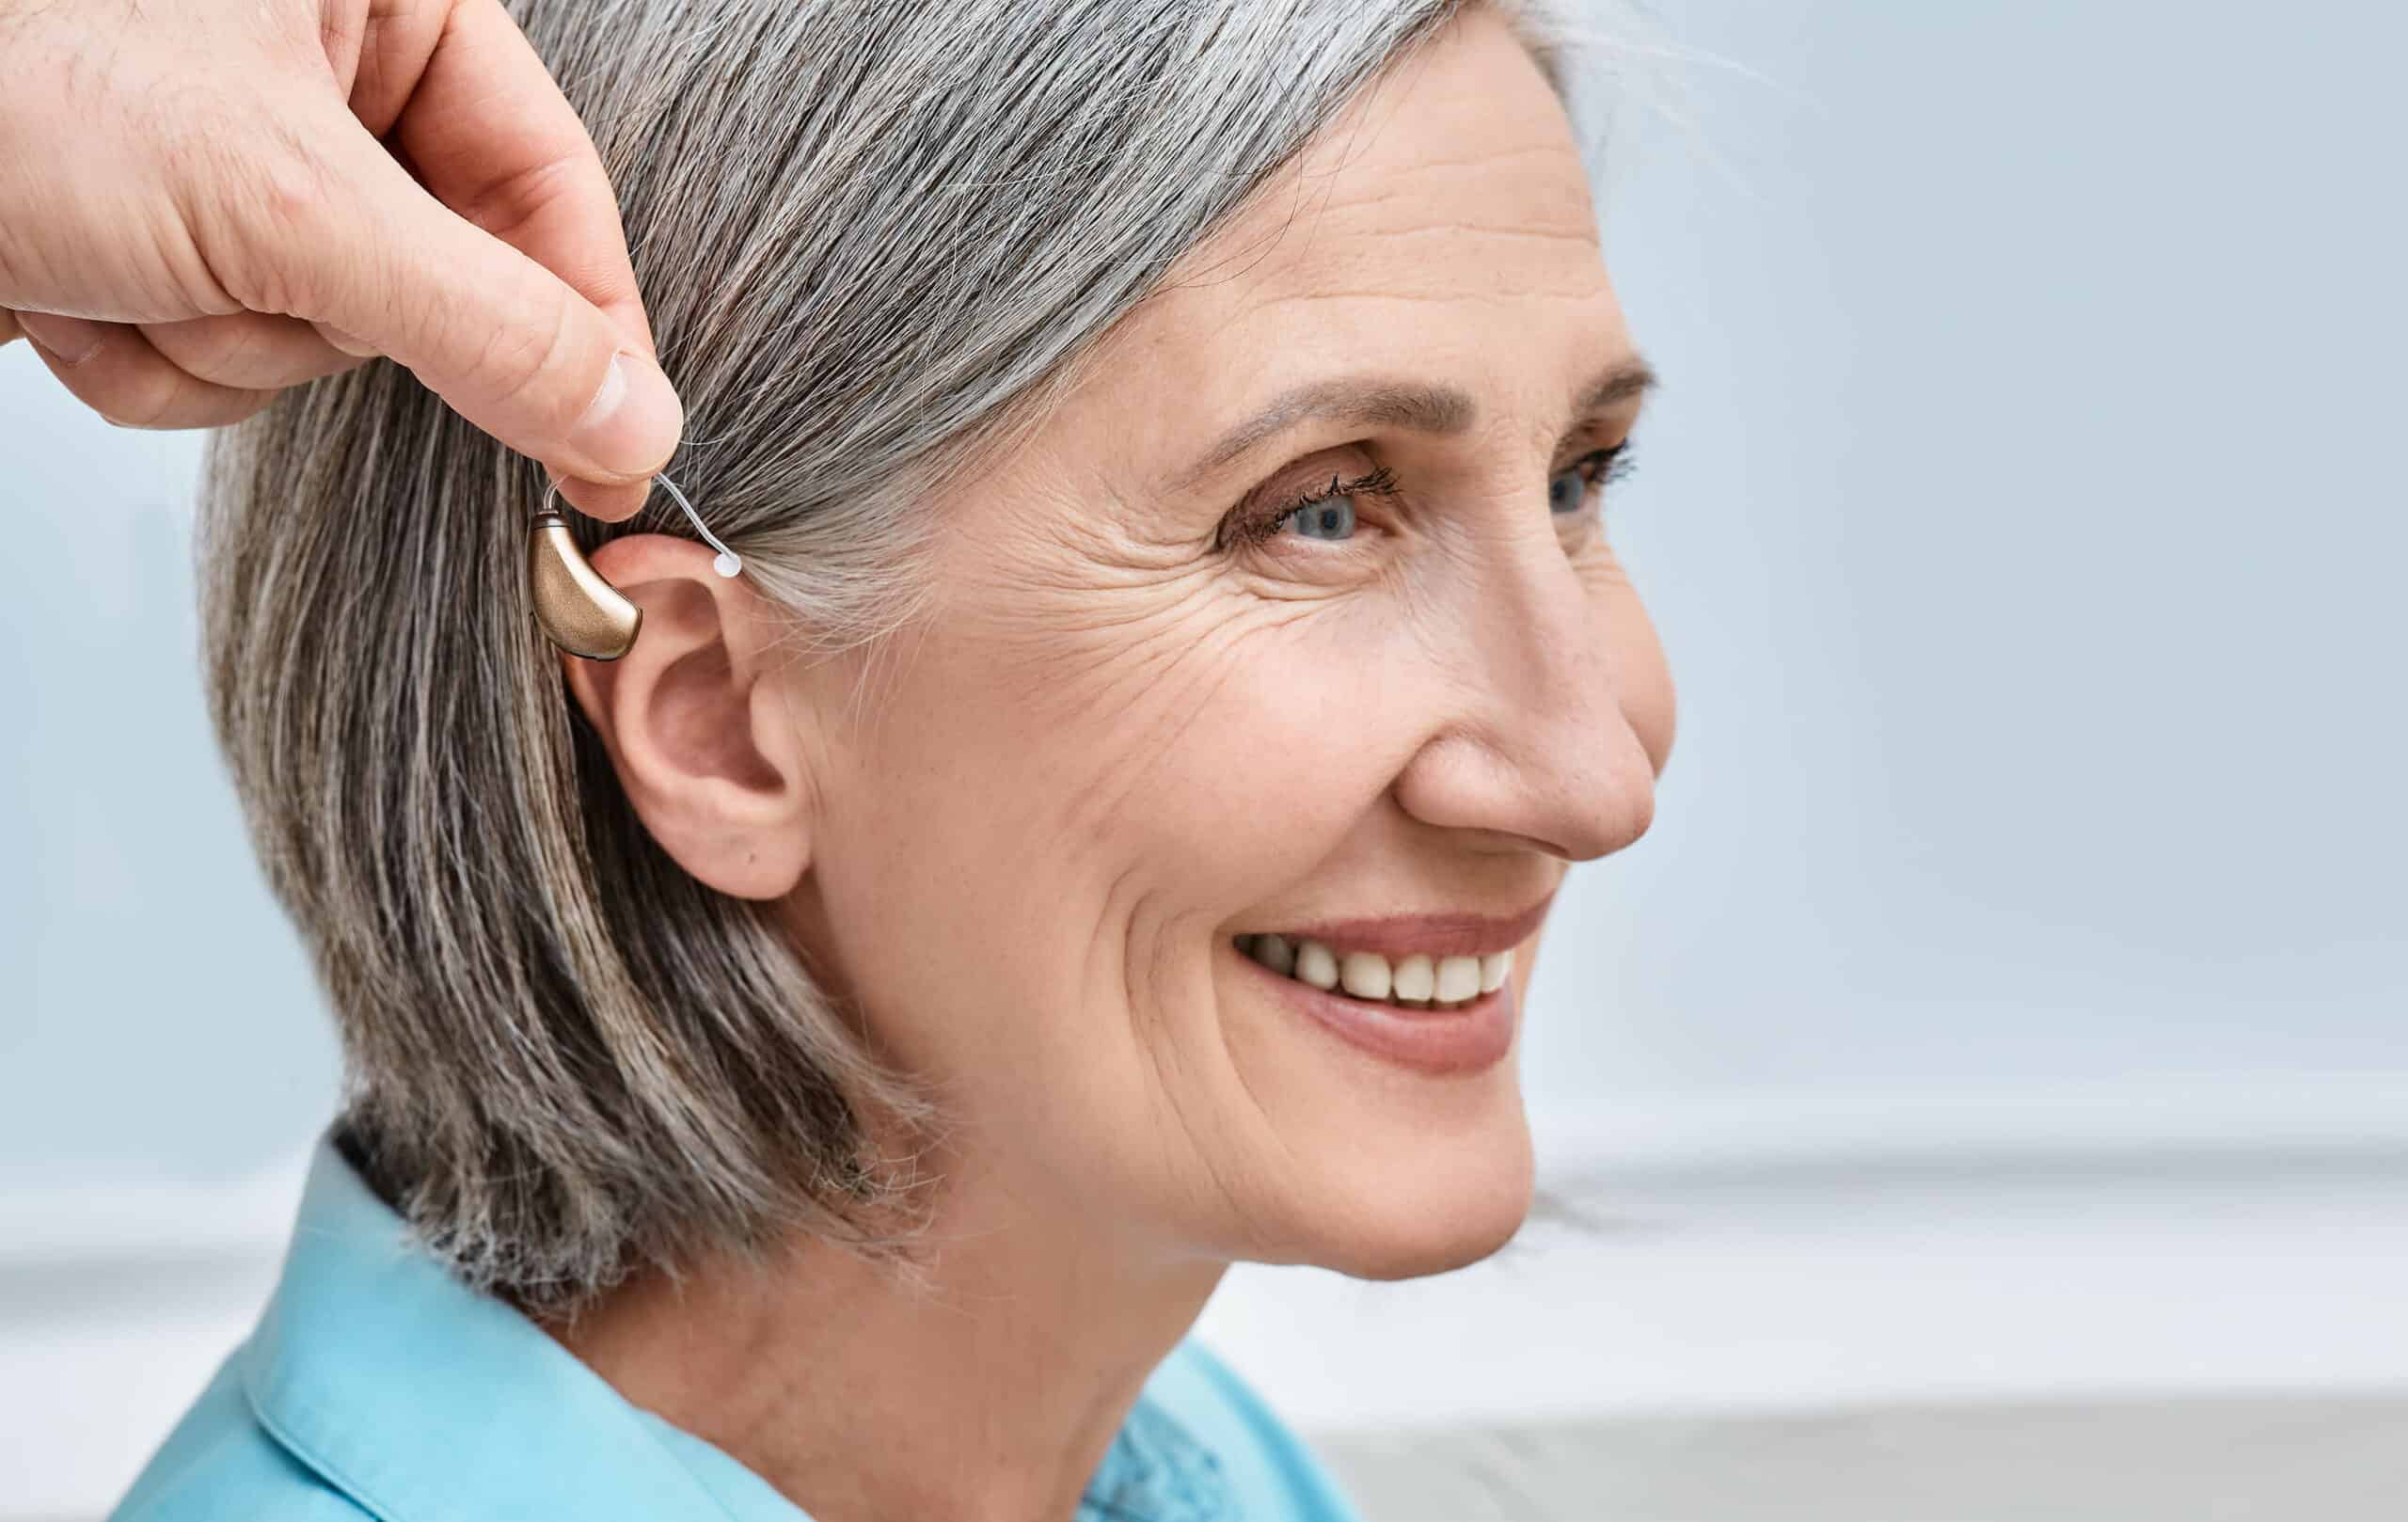 What it's like to wear hearing aids